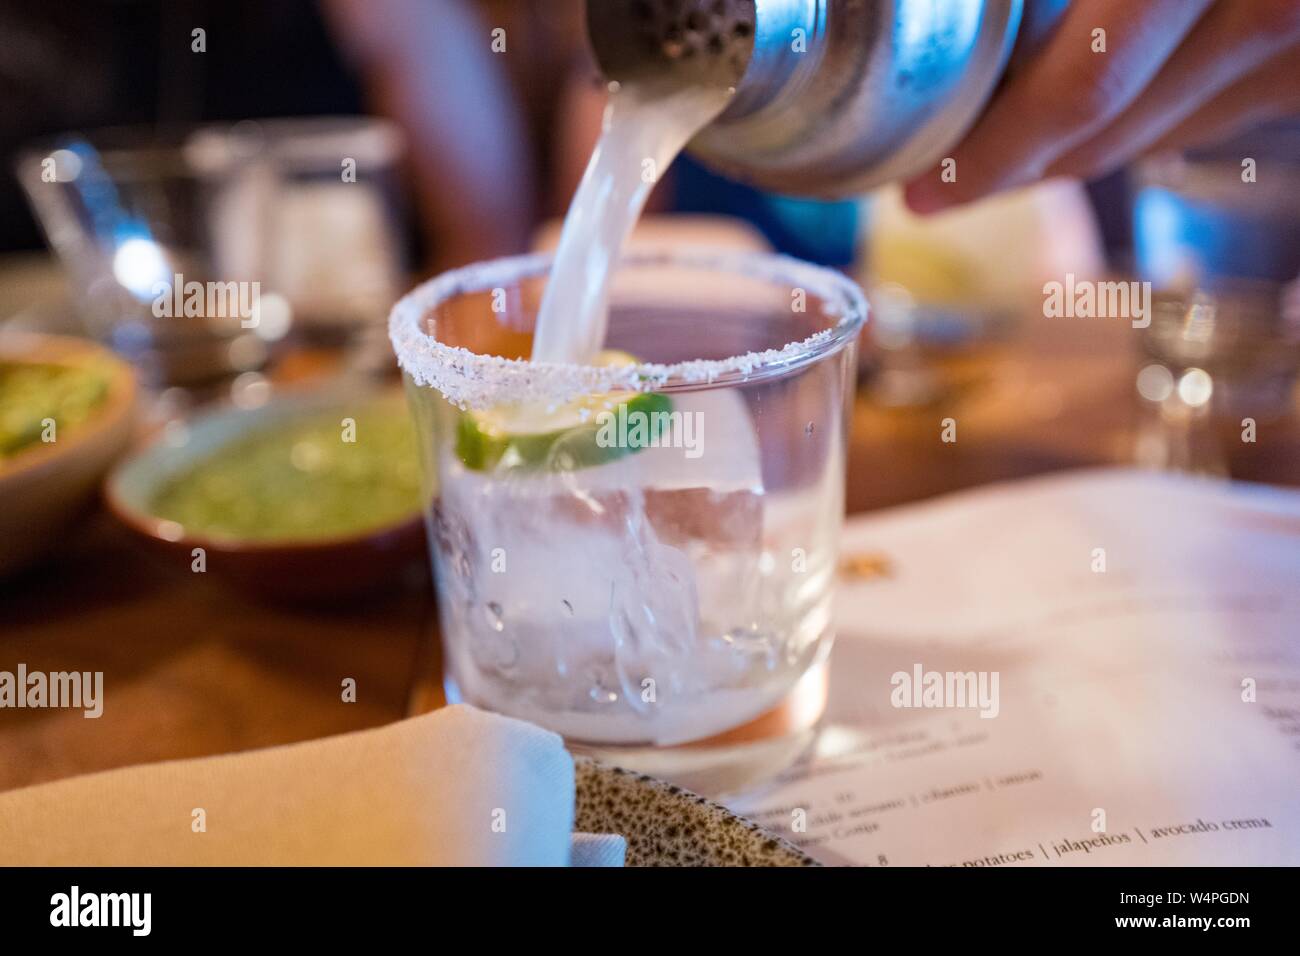 Close-up of hand of a man pouring the signature Copita margarita into a salt rimmed glass at Copita Mexican cuisine restaurant in Sausalito, California, August 5, 2018. () Stock Photo